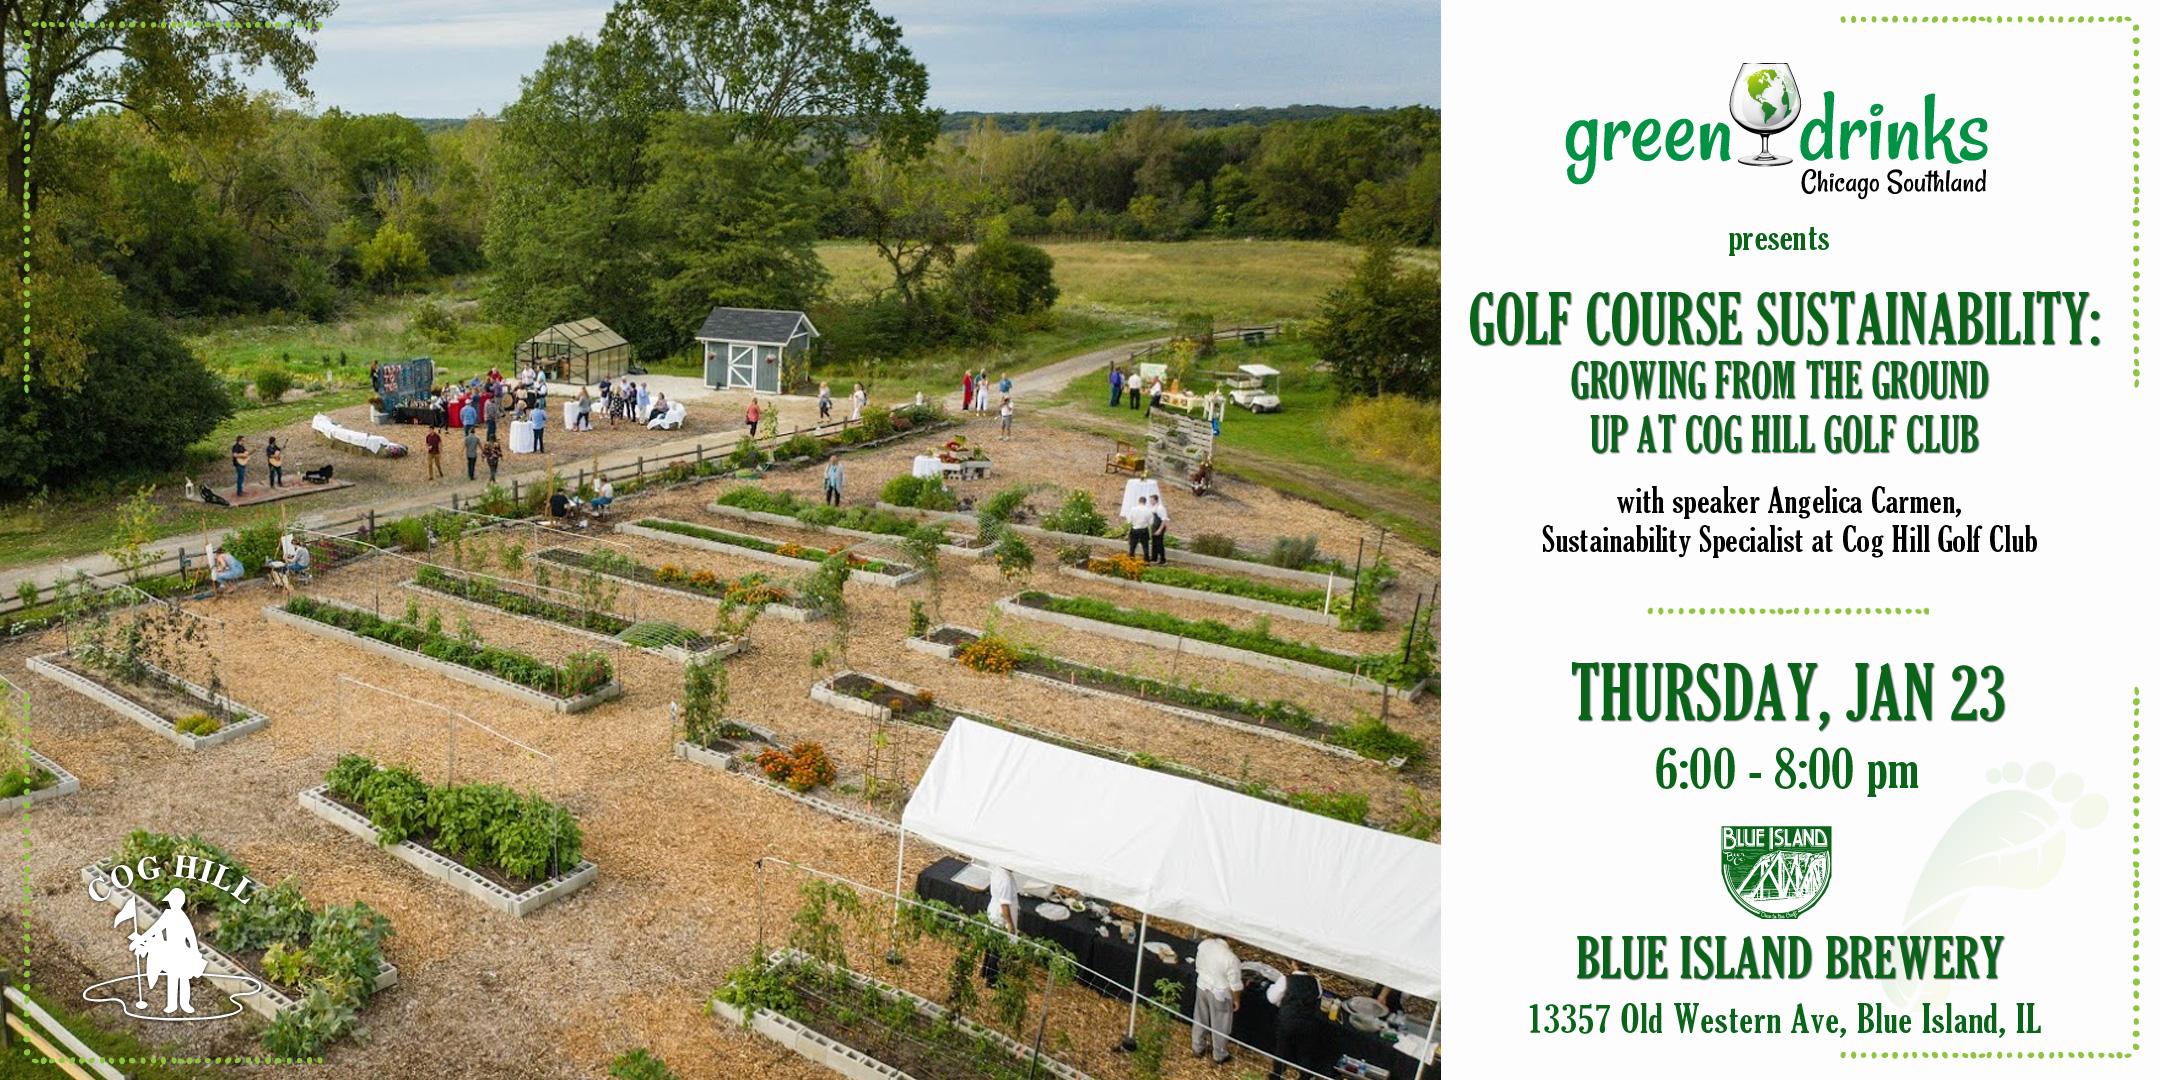 Golf Course Sustainability-Growing From the Ground Up at Cog Hill Golf Club